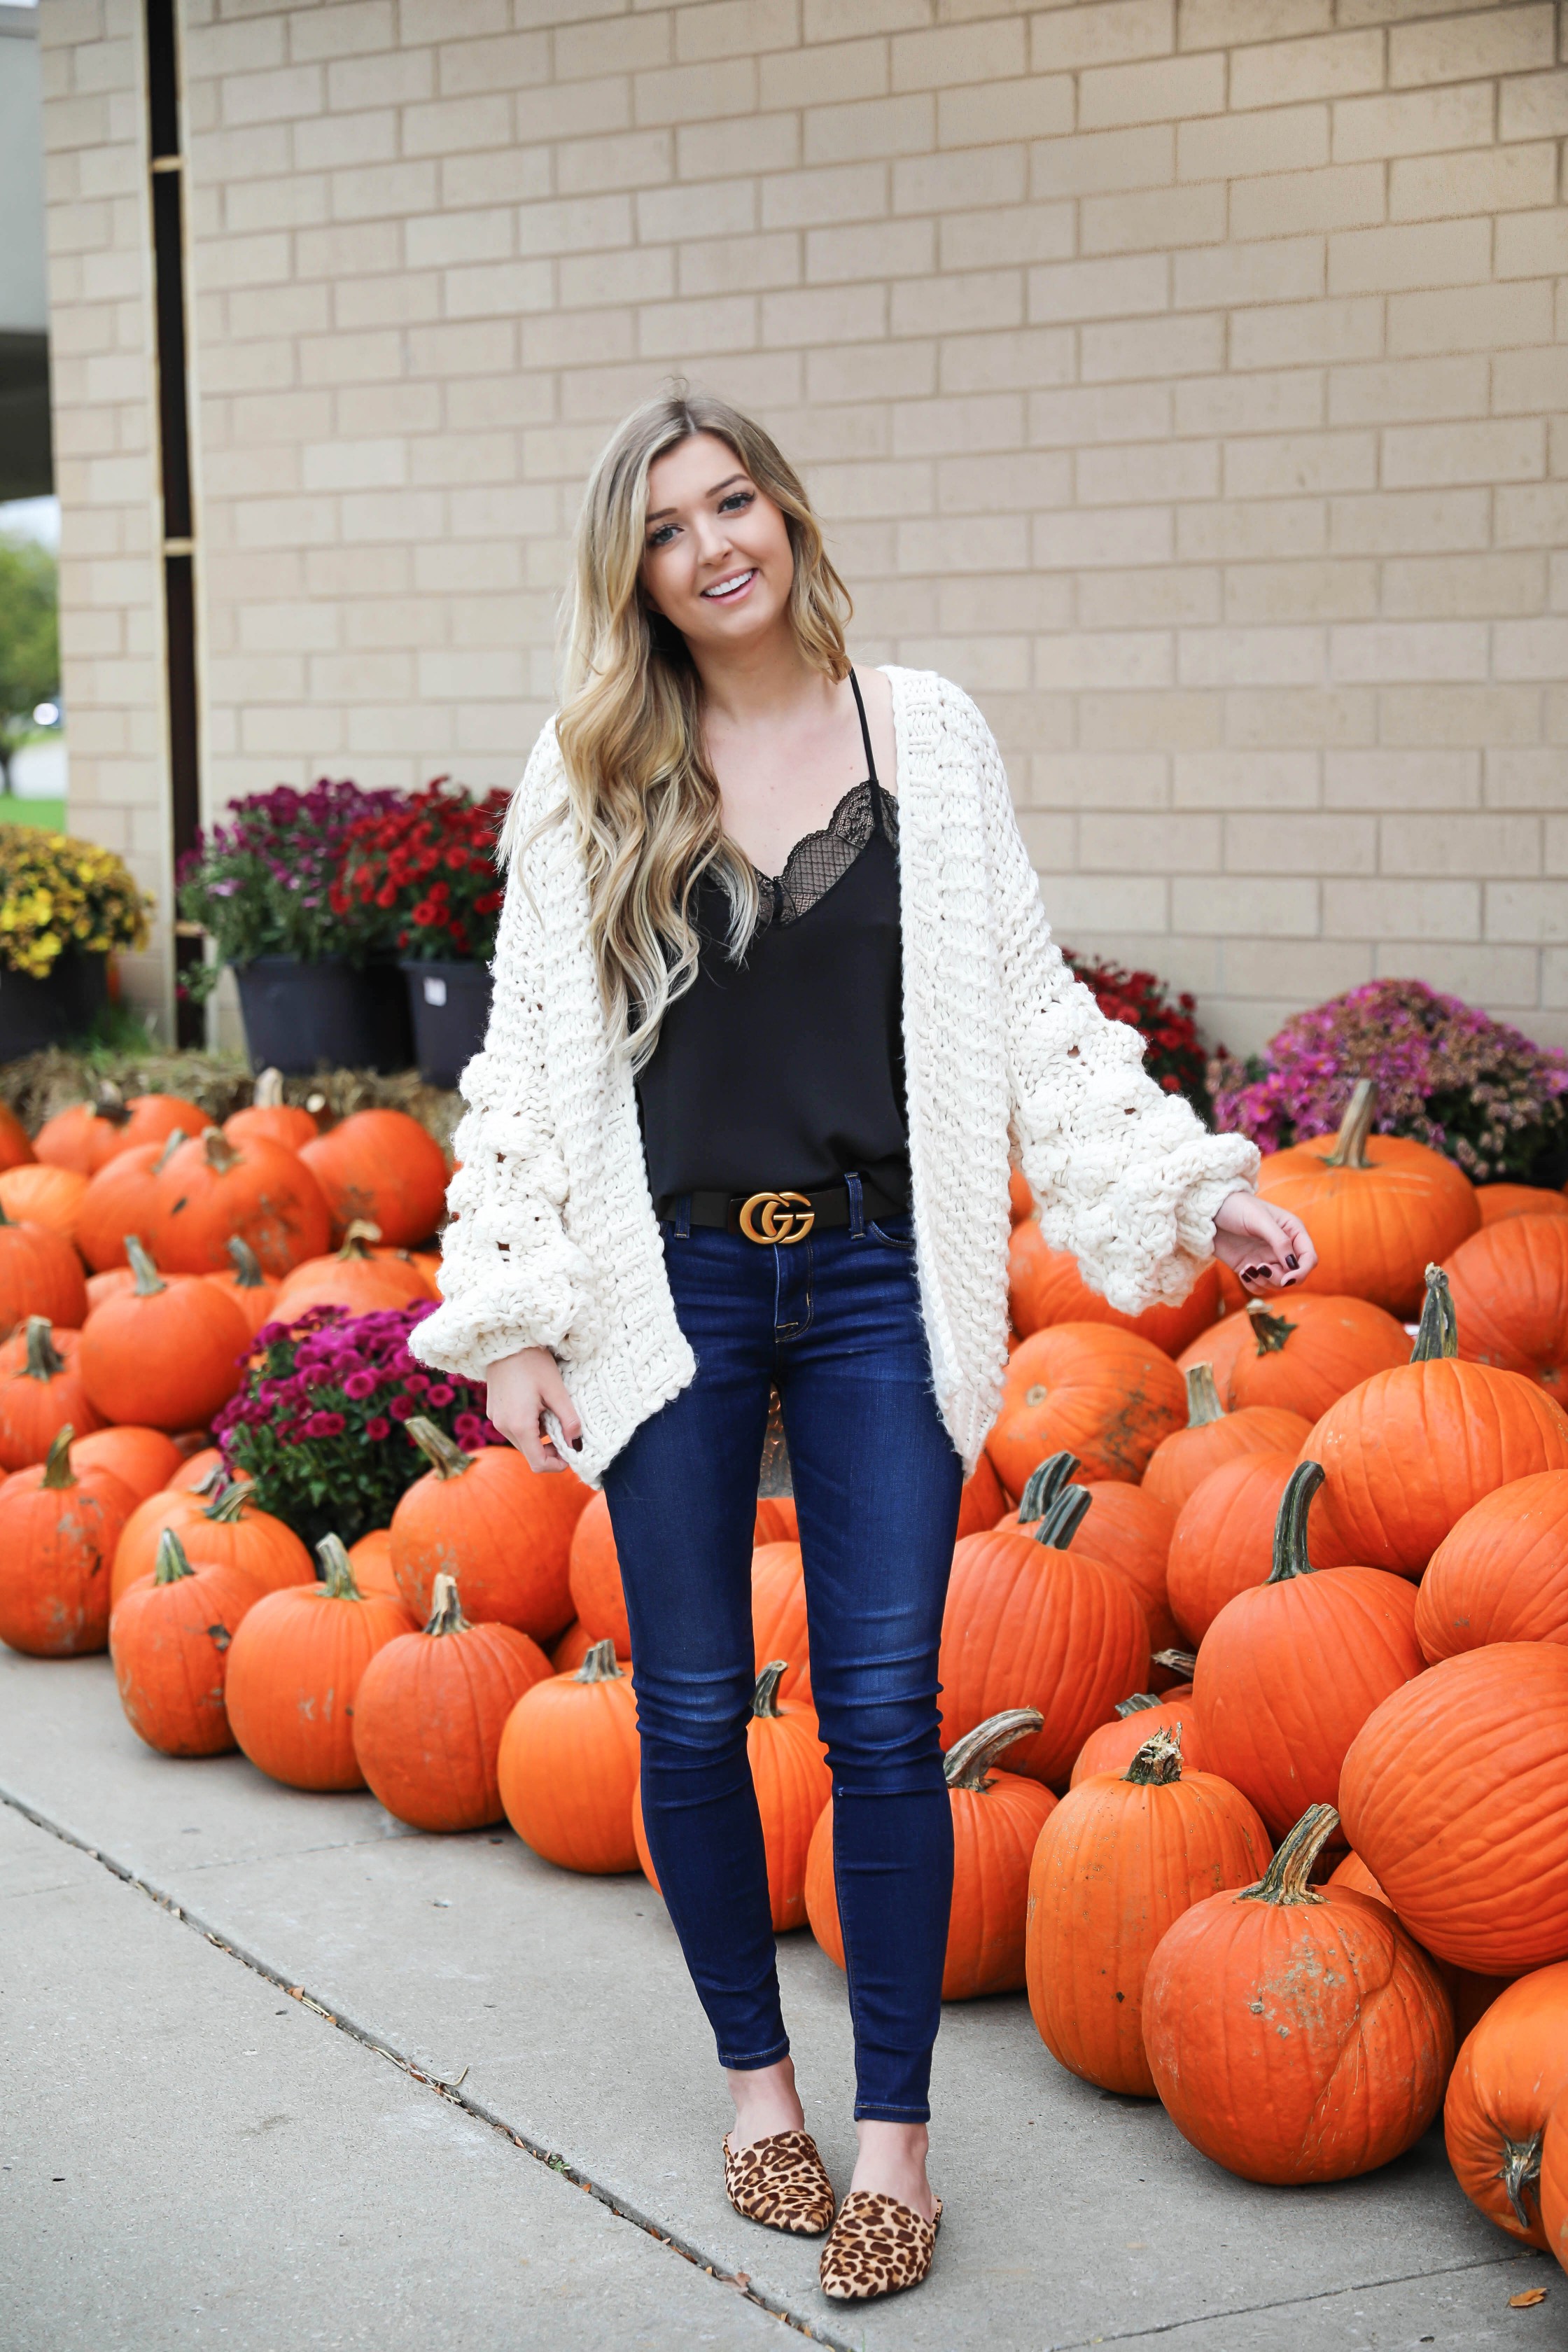 Puffy sleeve knit cardigan! I love finding unique ivory sweaters for fall and winter! I paired it with my favorite black lacey cami and gucci belt! Nothing like dark jeans and leopard shoes for fall! Details on fashion blog daily dose of charm by lauren lindmark